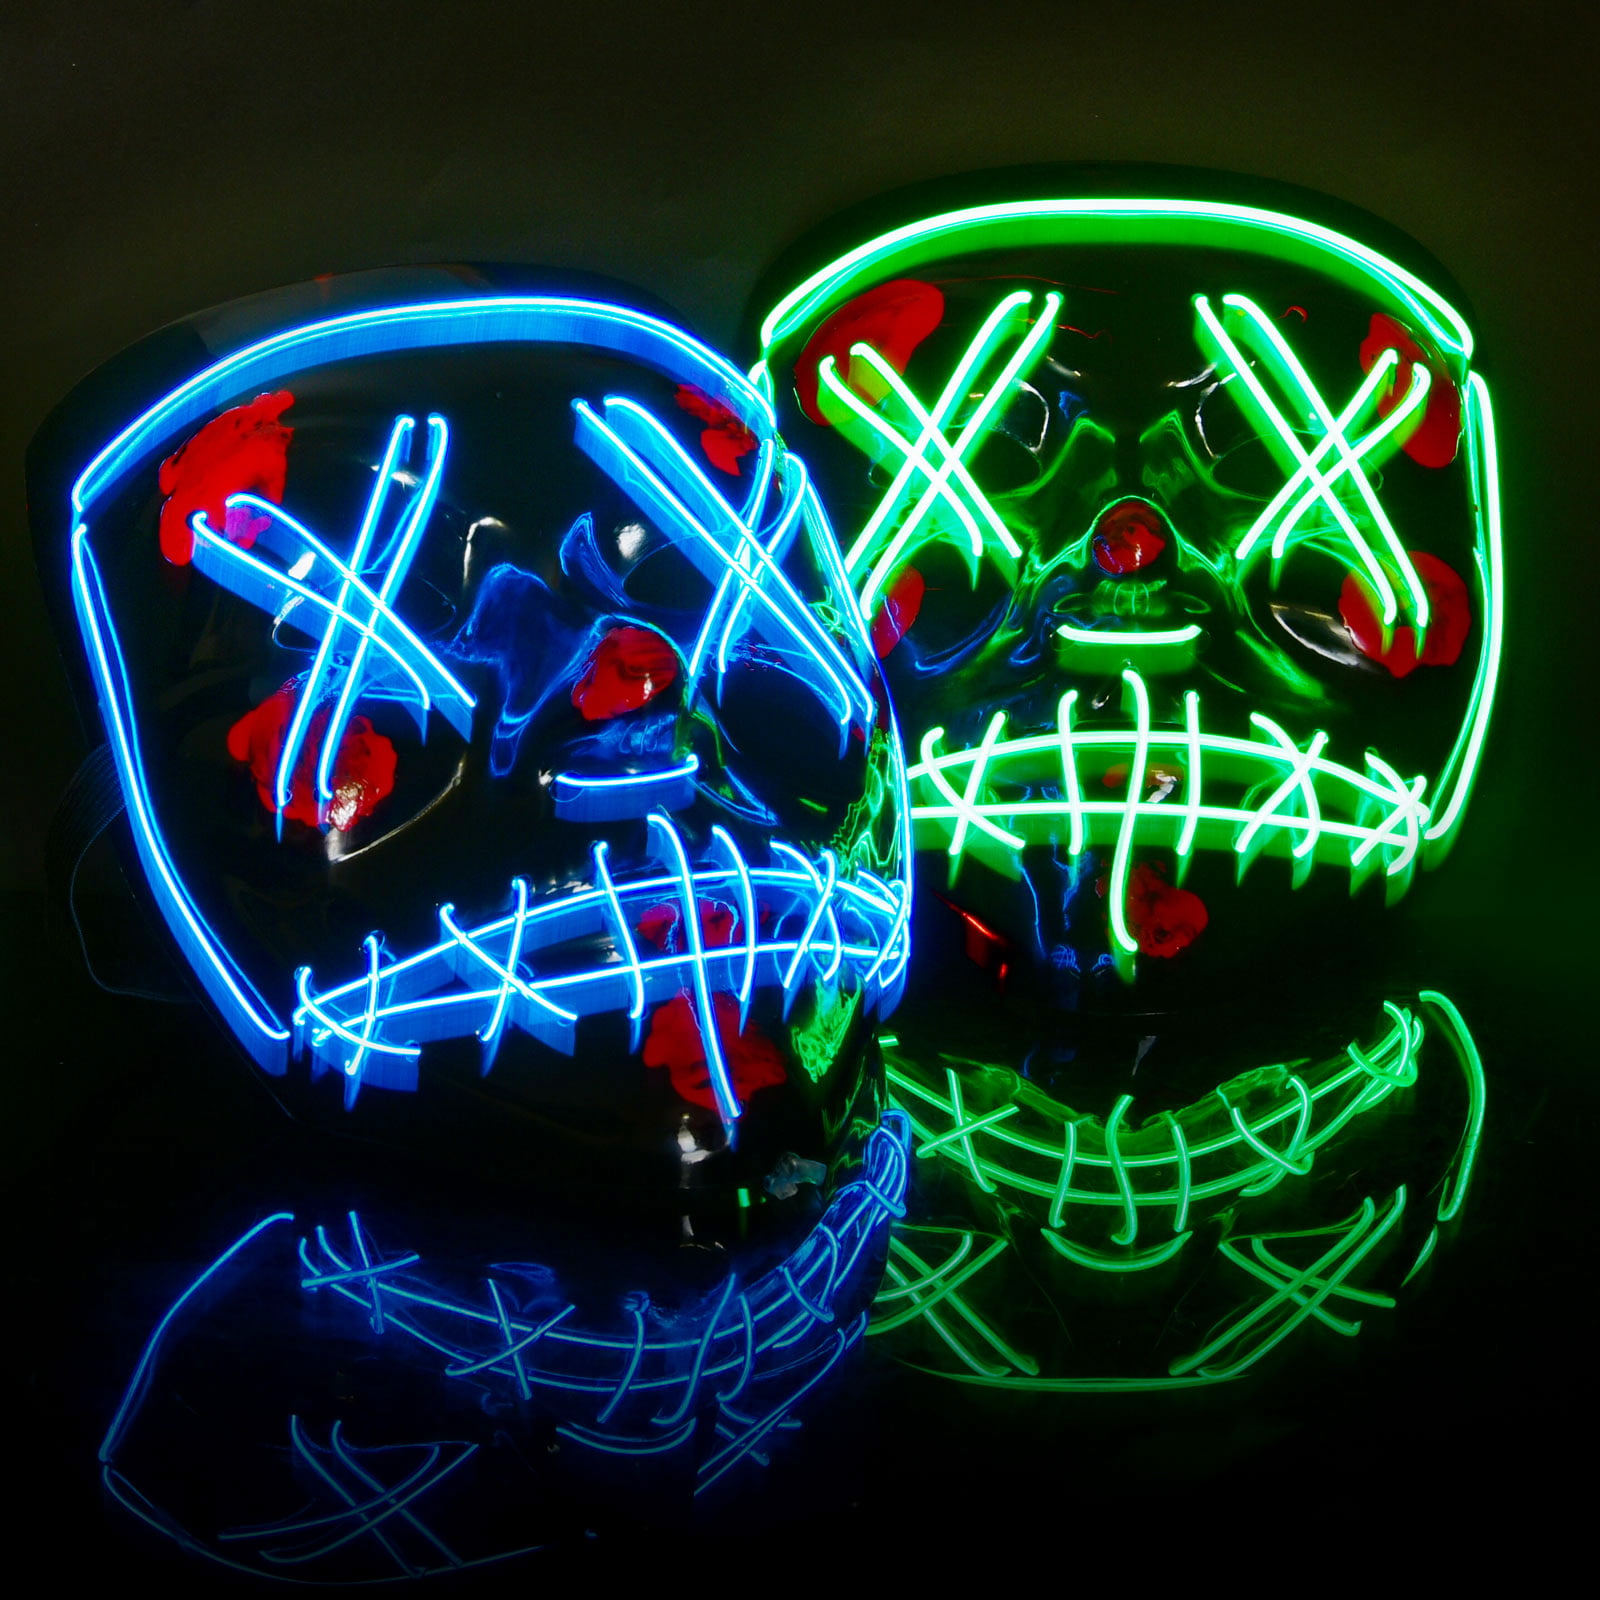 Halloween Led Mask Light Up Clown Mask with 3 Lighting Modes for Halloween Costume and Party Supplies 